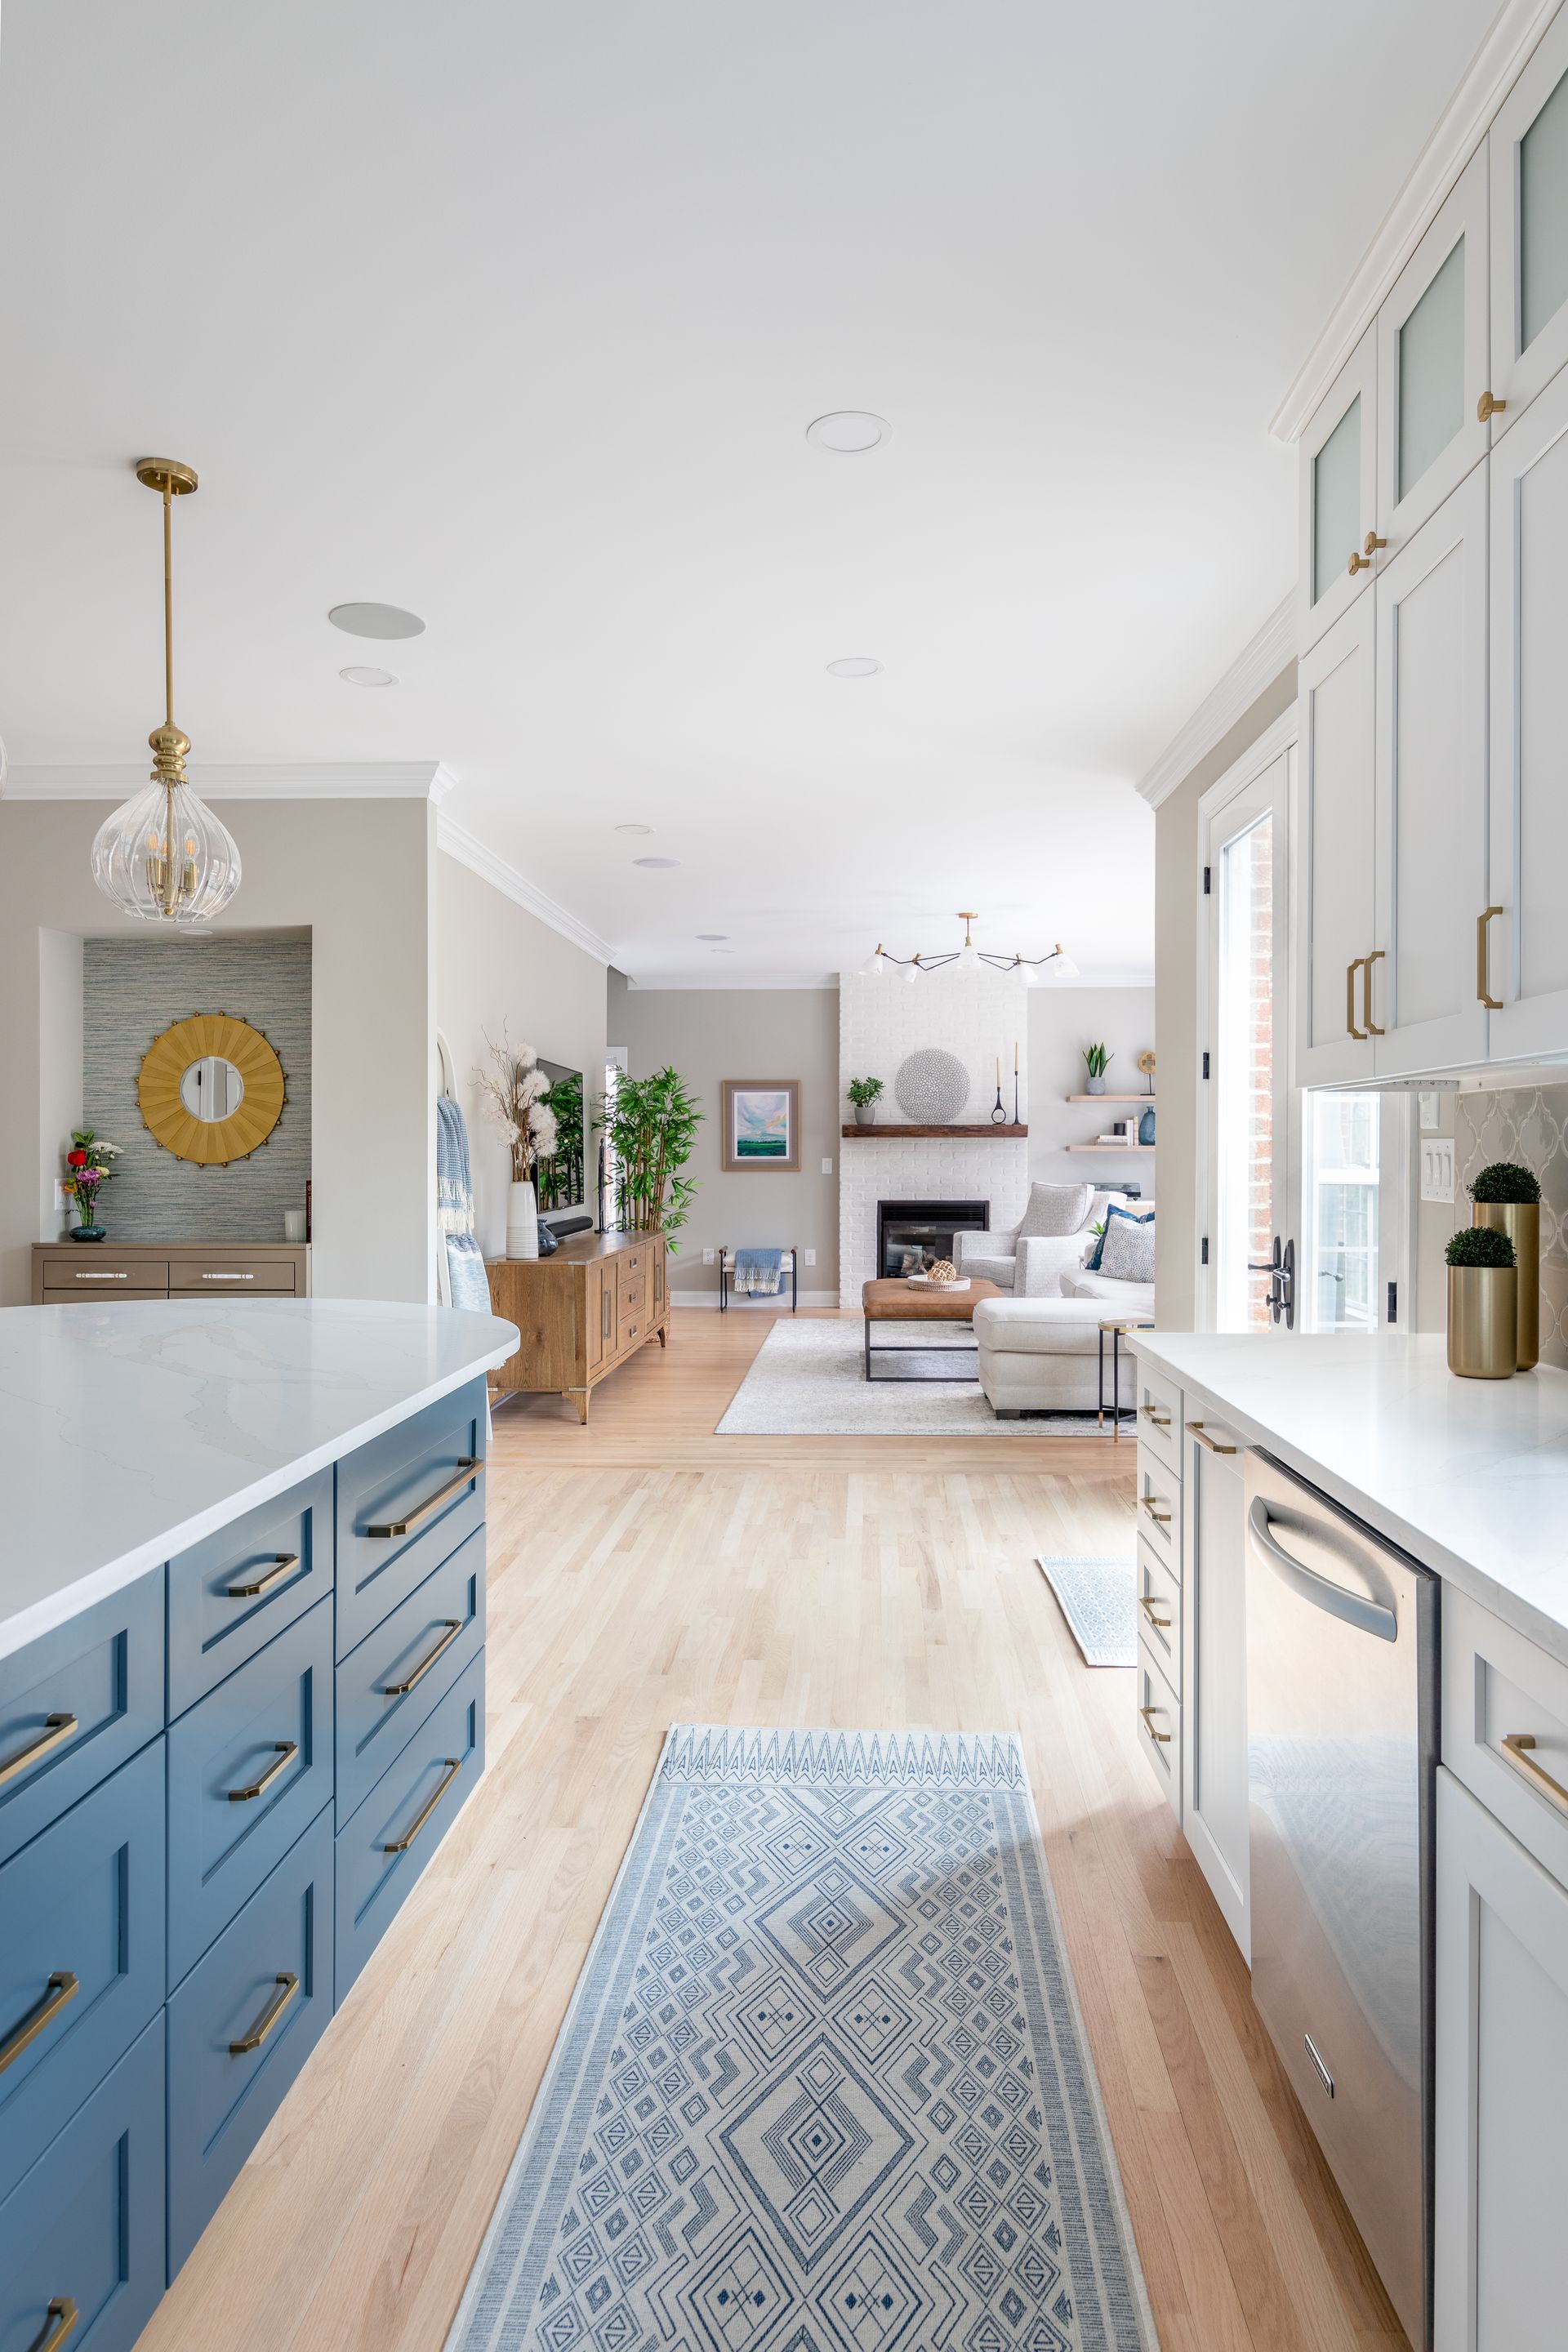 5 must haves for your custom dream kitchen